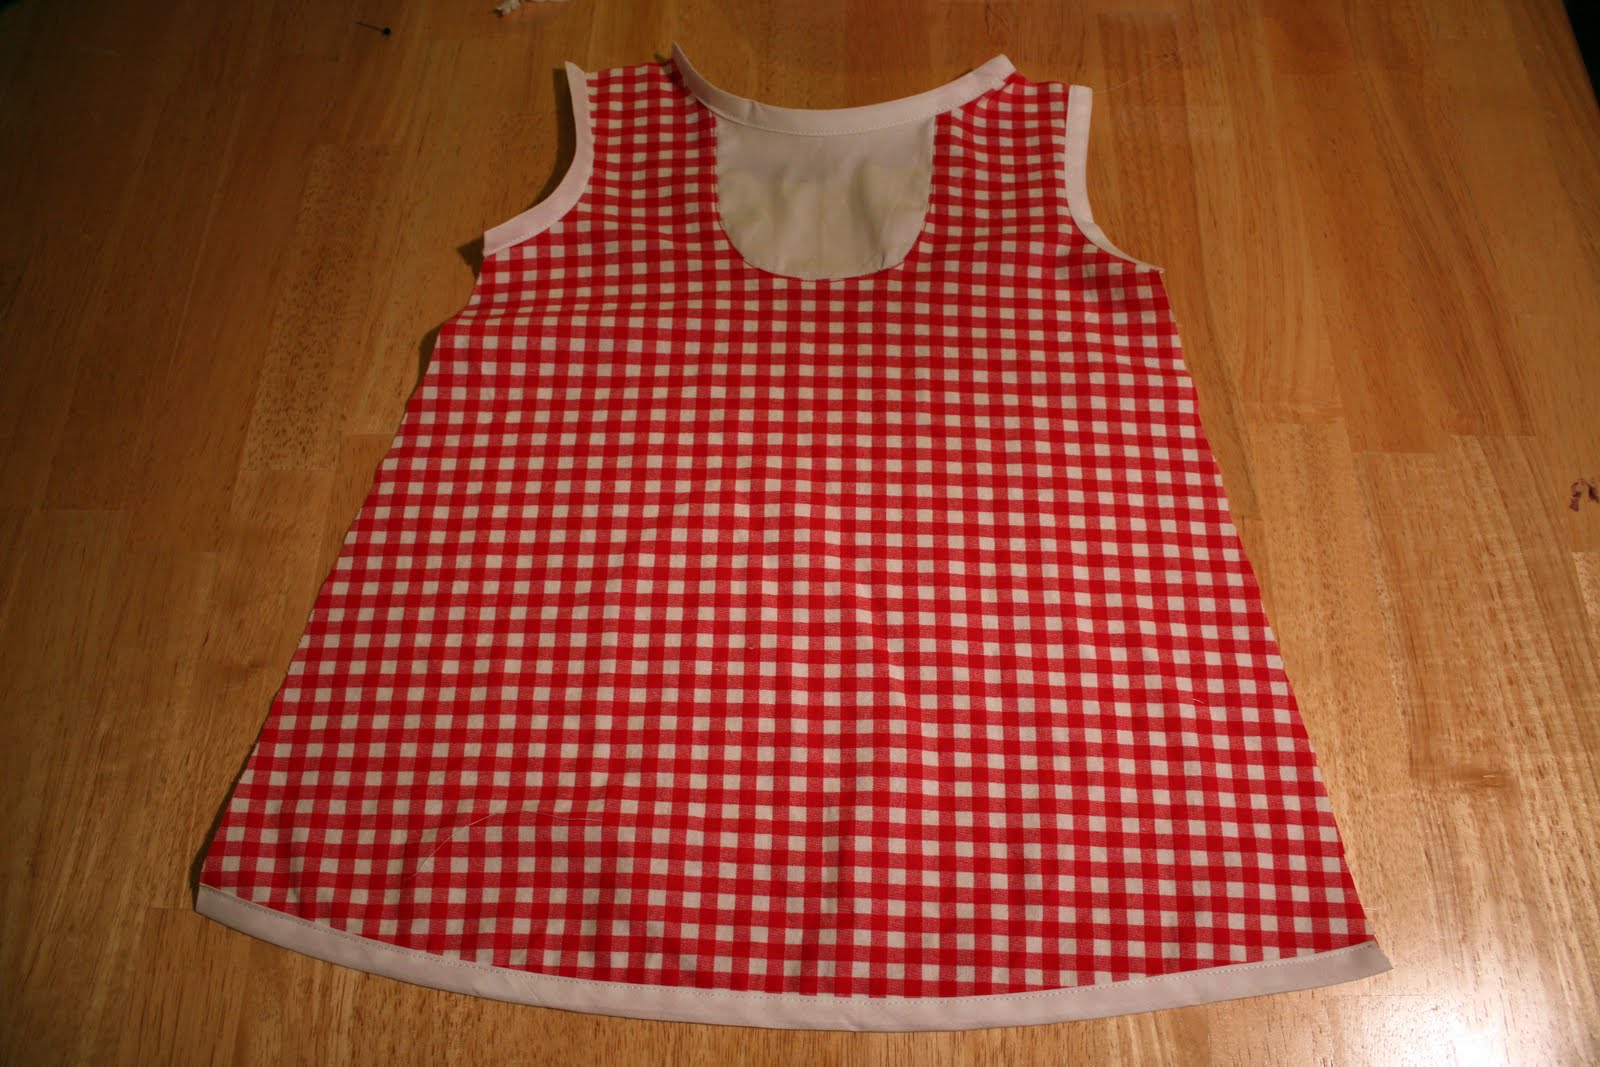 The witty tales of trendymeg: The Picnic Dress (Tutorial)